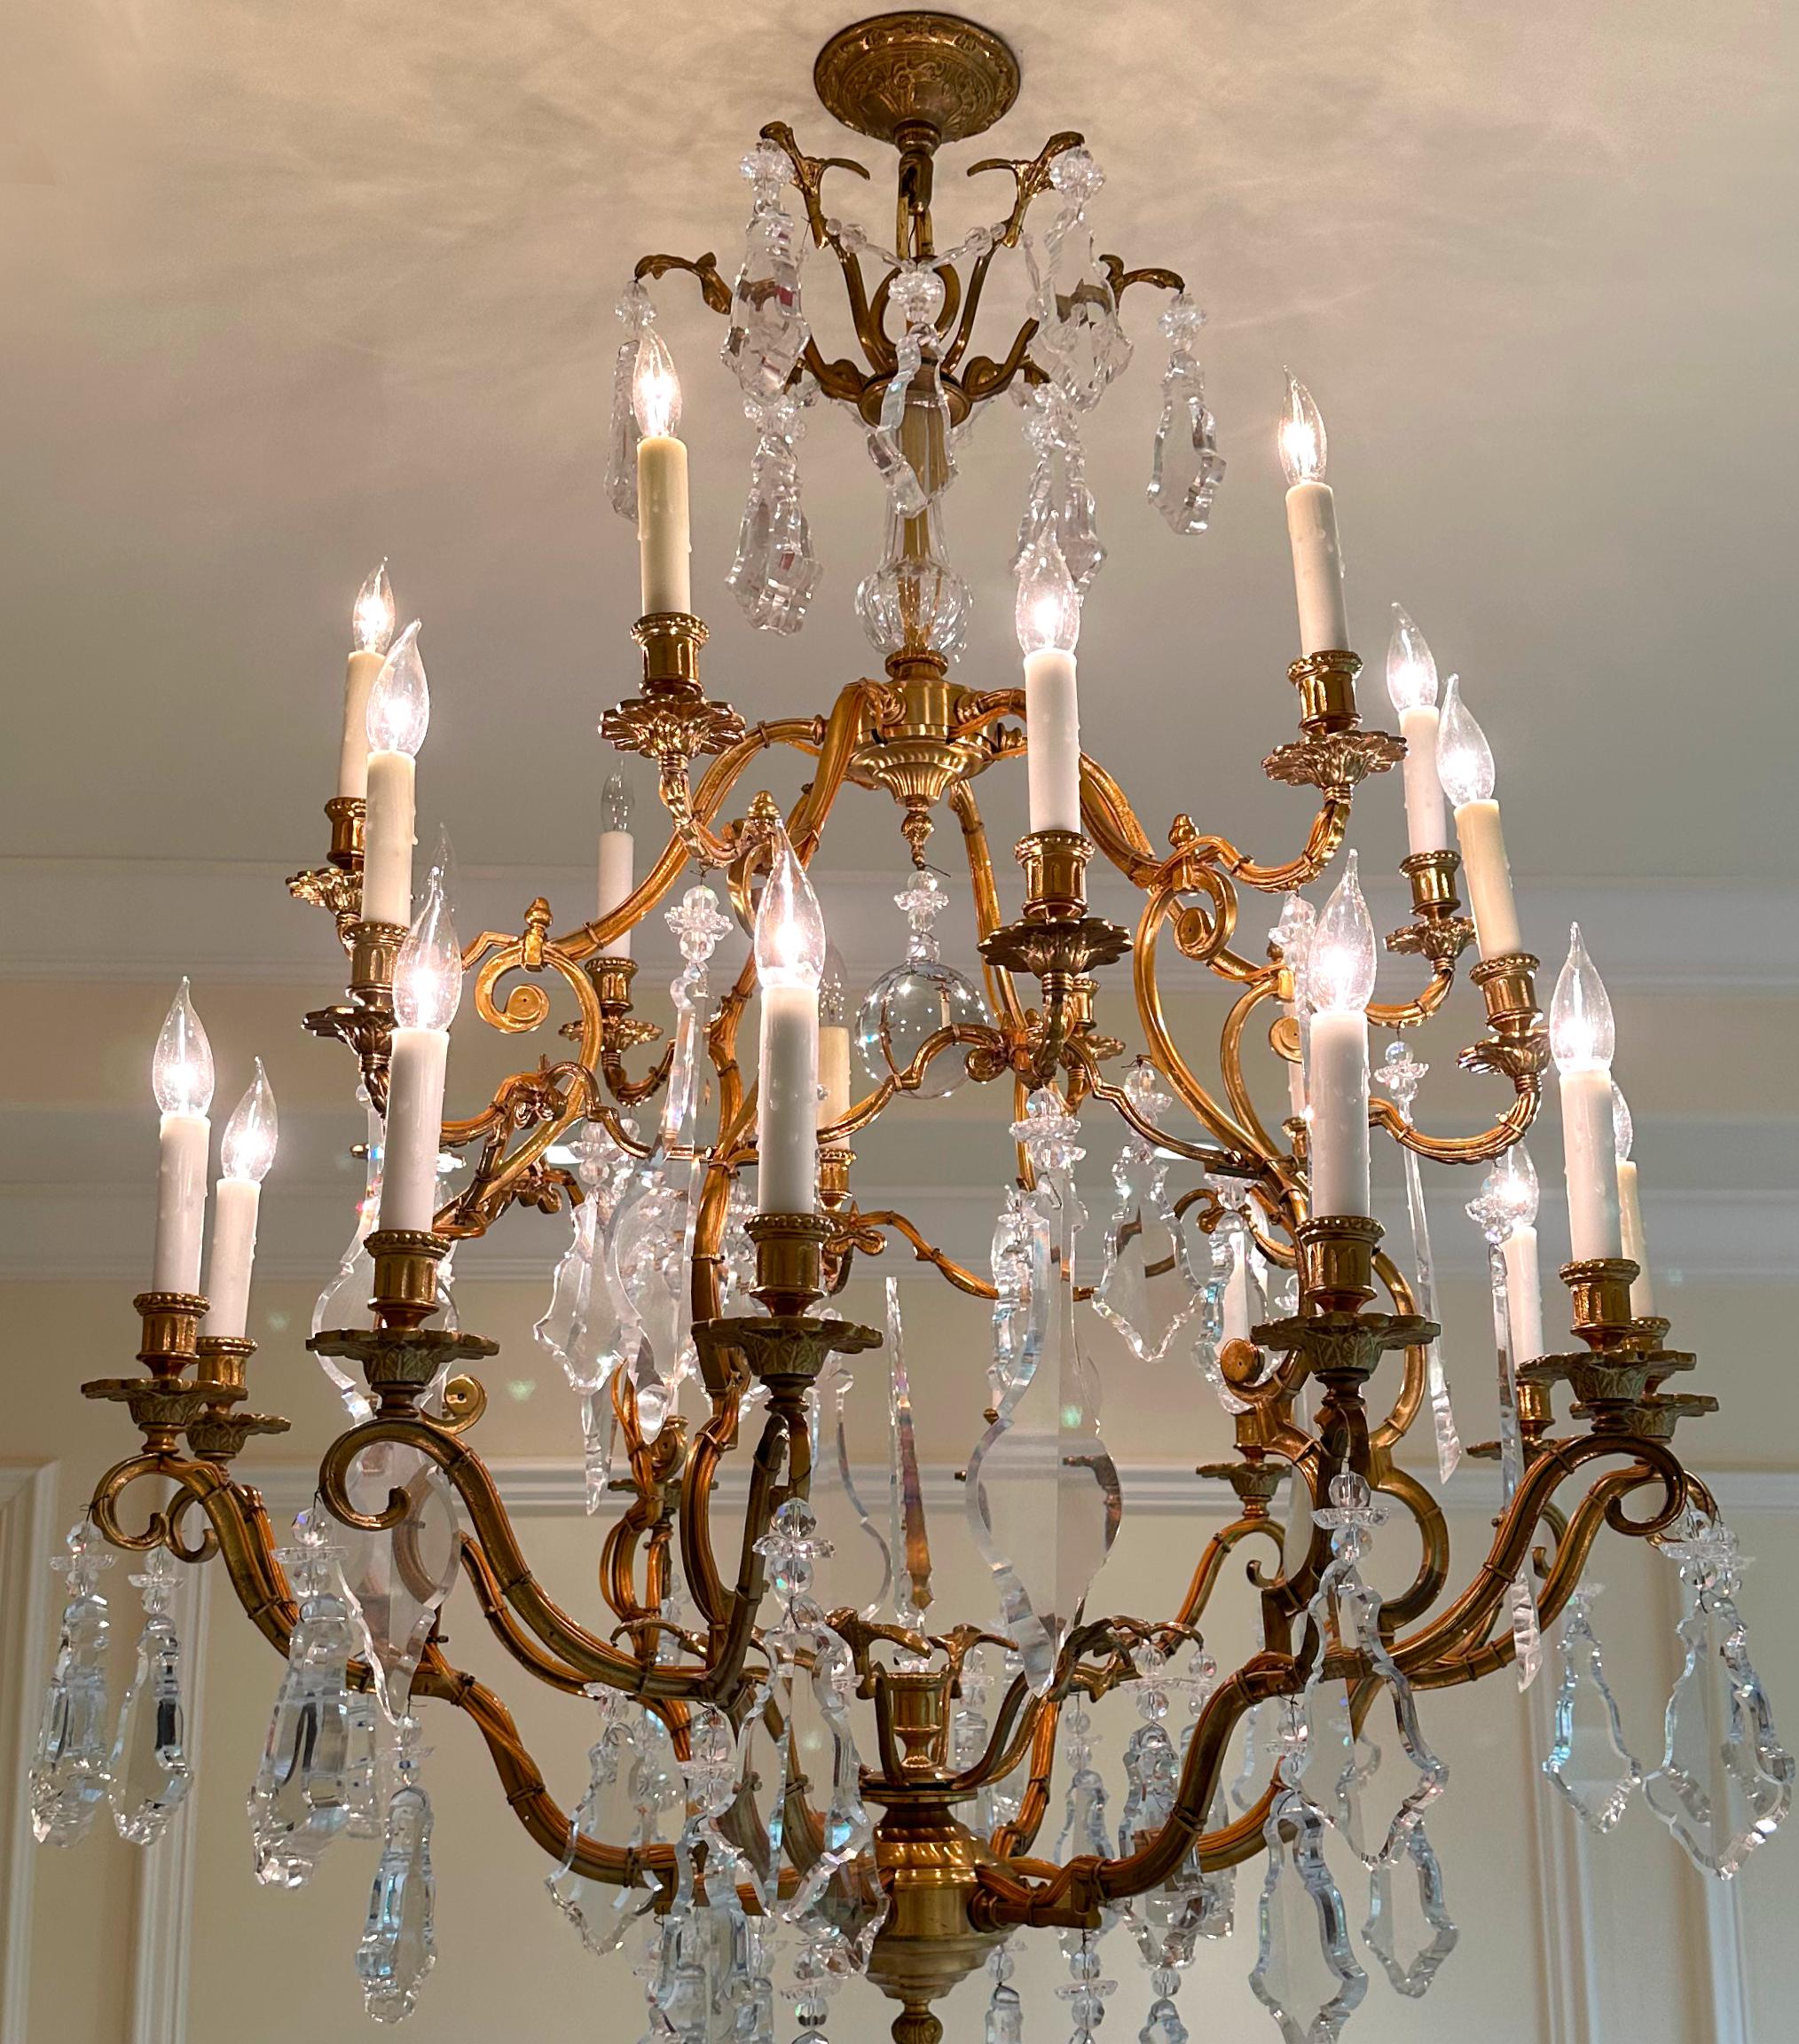 
Fine Louis XV Style Gilt Bronze & Cut-Glass Twenty-One Light Chandelier 
The cage-form corona with scrolled arms supporting nozzles and circular drip pans, the whole hung with cut glass and rock crystal prisms and chains. 
Height 56 in. (142.5